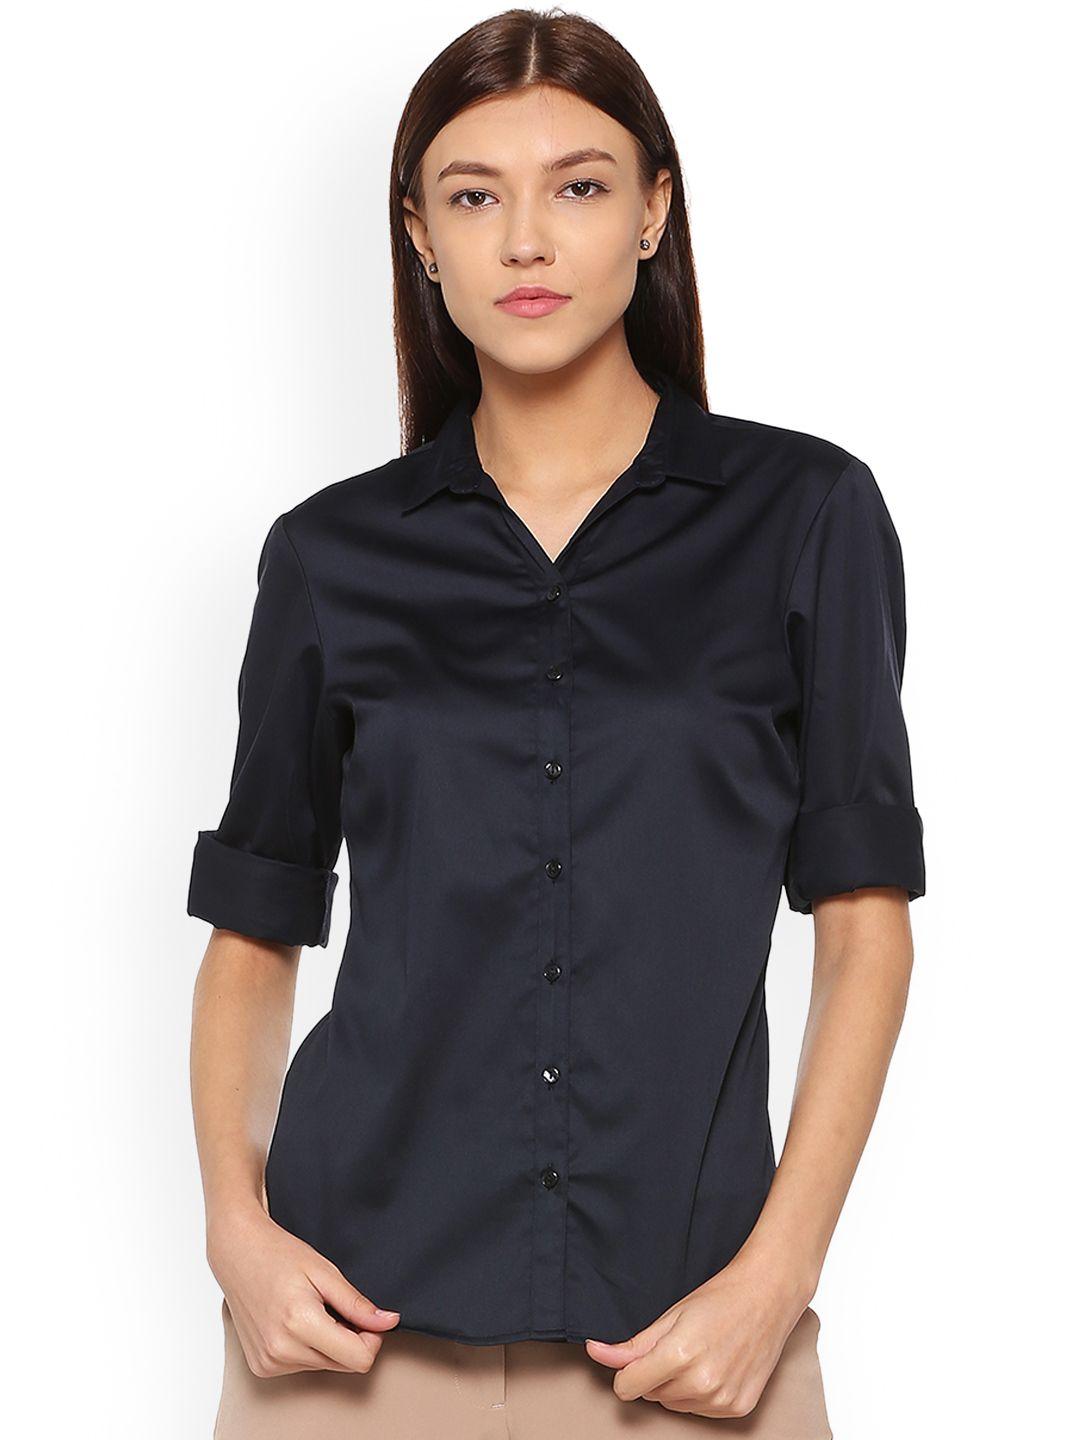 Allen Solly Woman Black Solid Casual Shirt